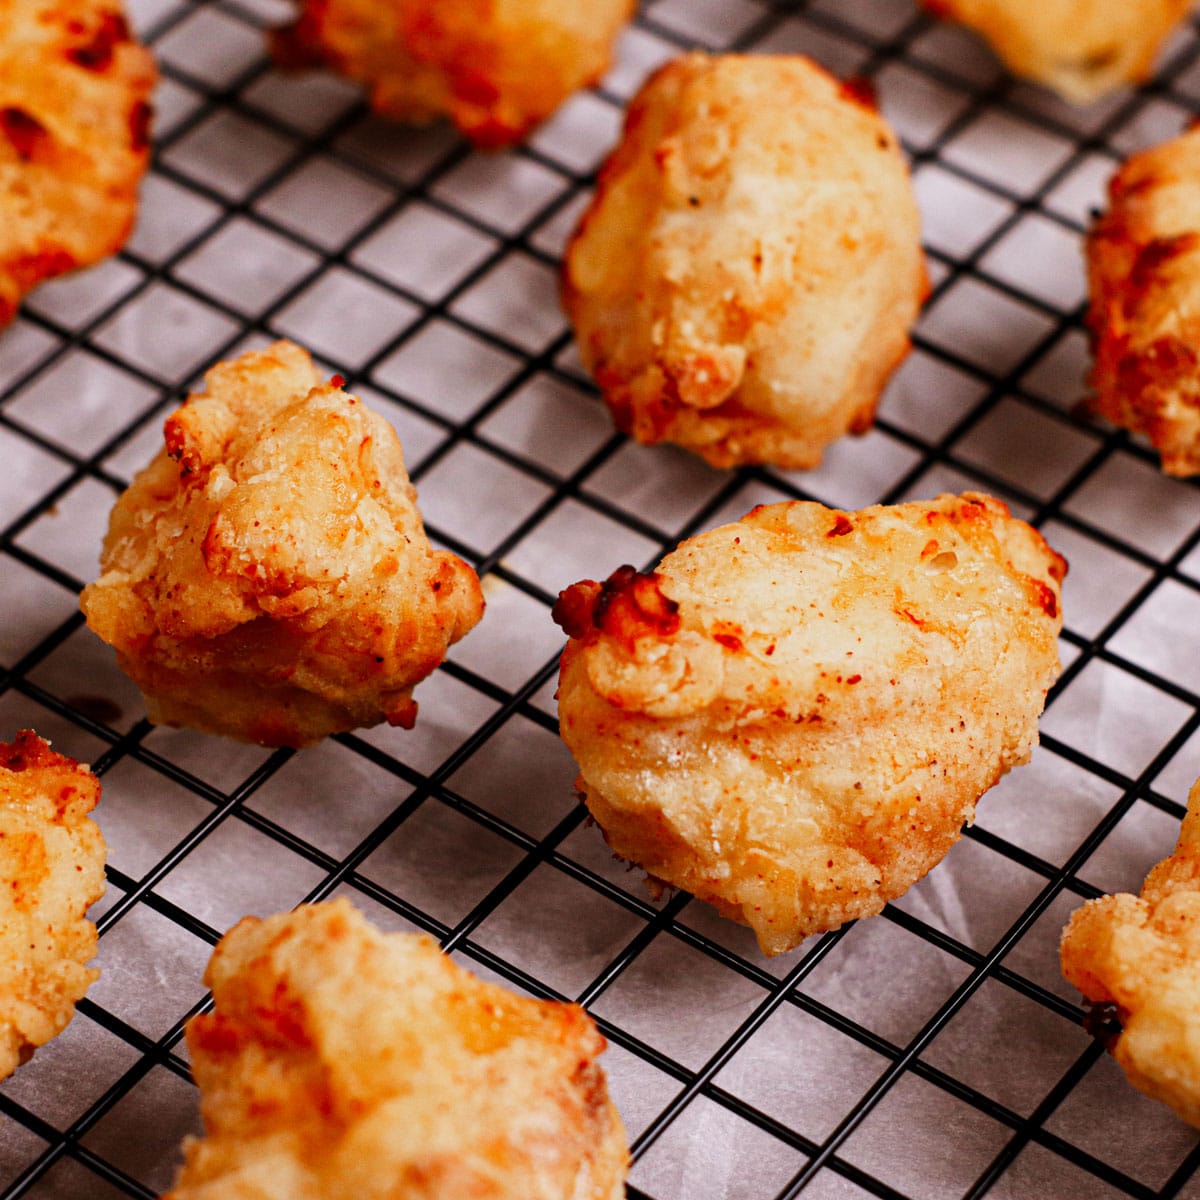 Chicken nuggets on a cooling rack